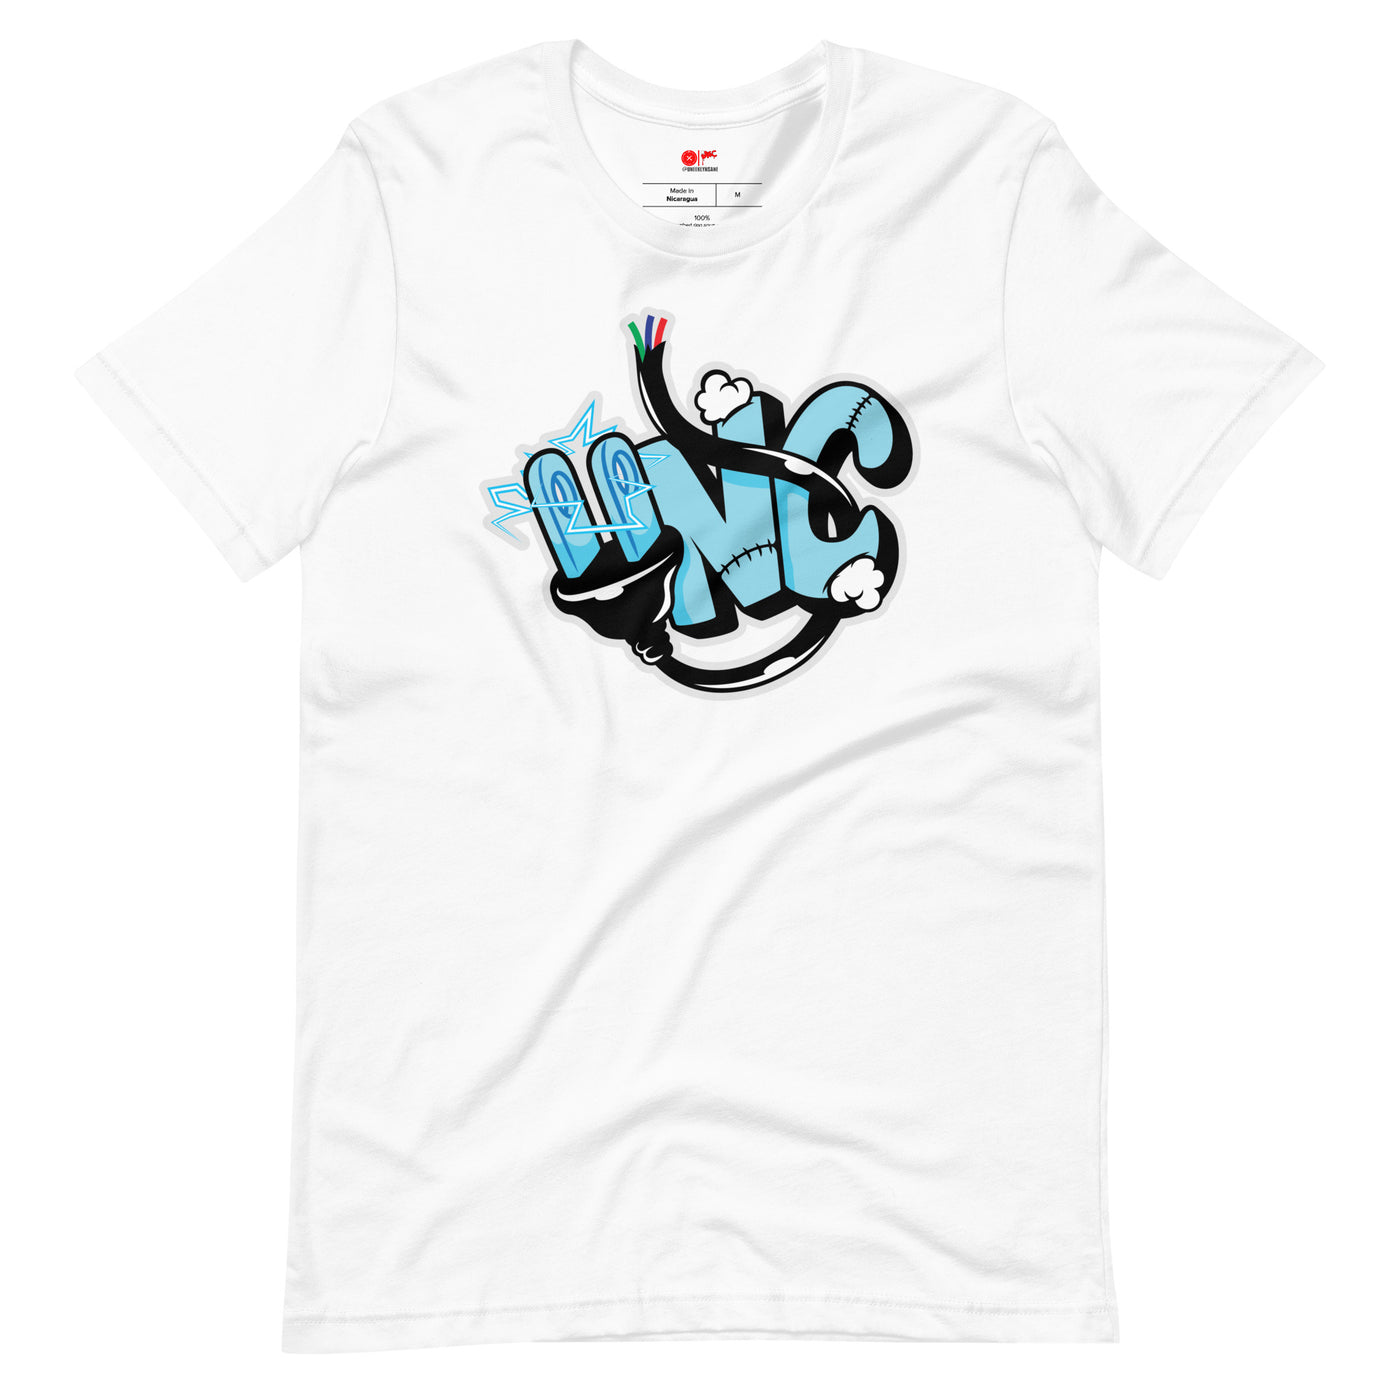 UNC Plug In T-shirt (Carolina Blue) - Unique Sweatsuits, hats, tees, shorts, hoodies, Outwear & accessories online | Uneekly Nsane